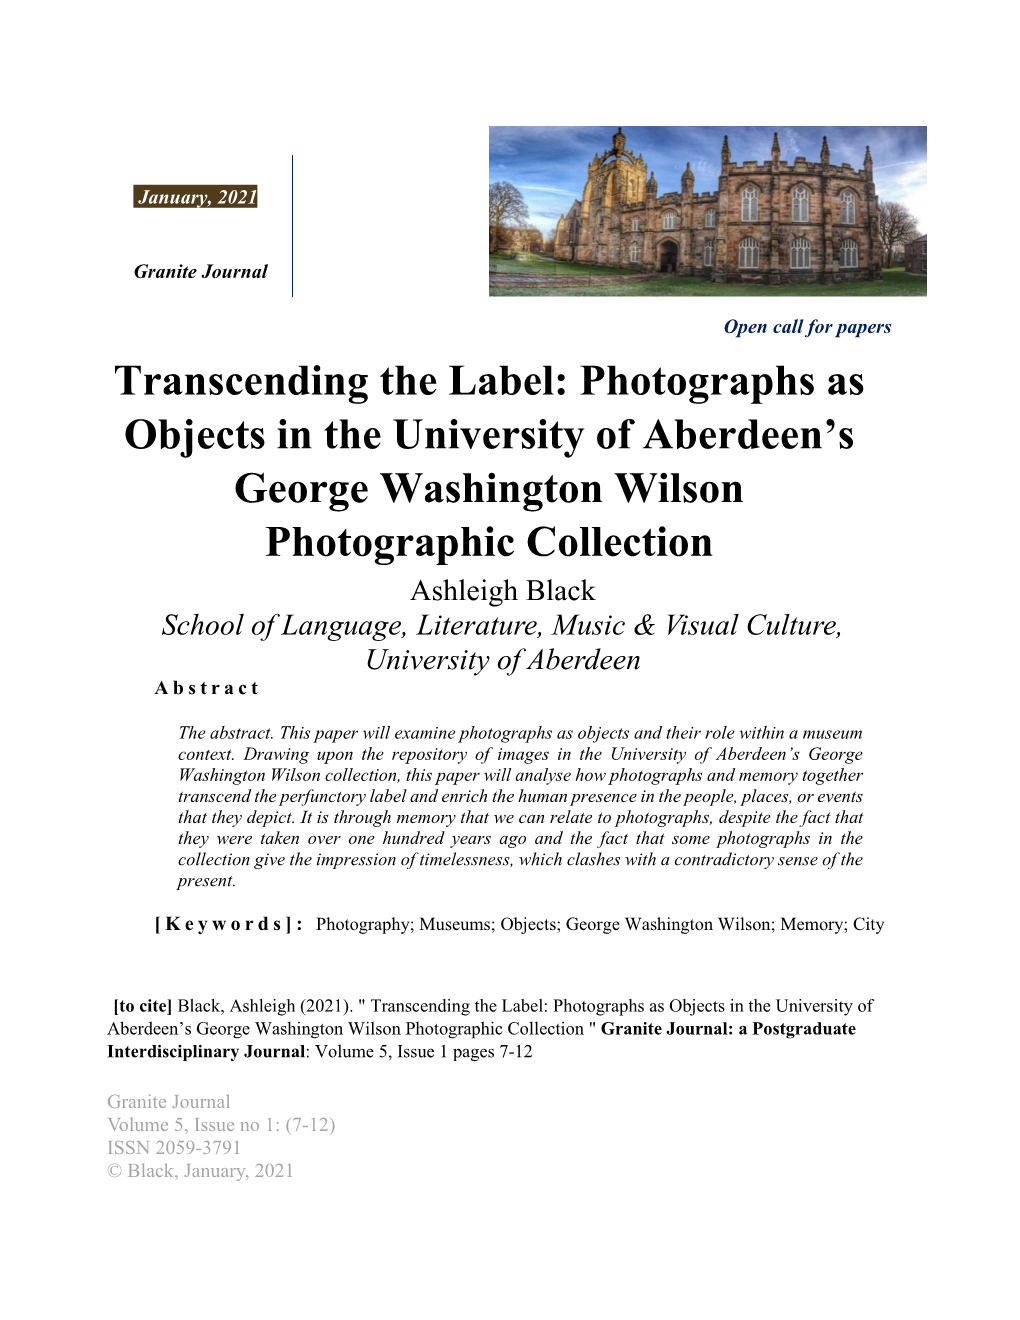 Transcending the Label: Photographs As Objects in the University of Aberdeen's George Washington Wilson Photographic Collectio